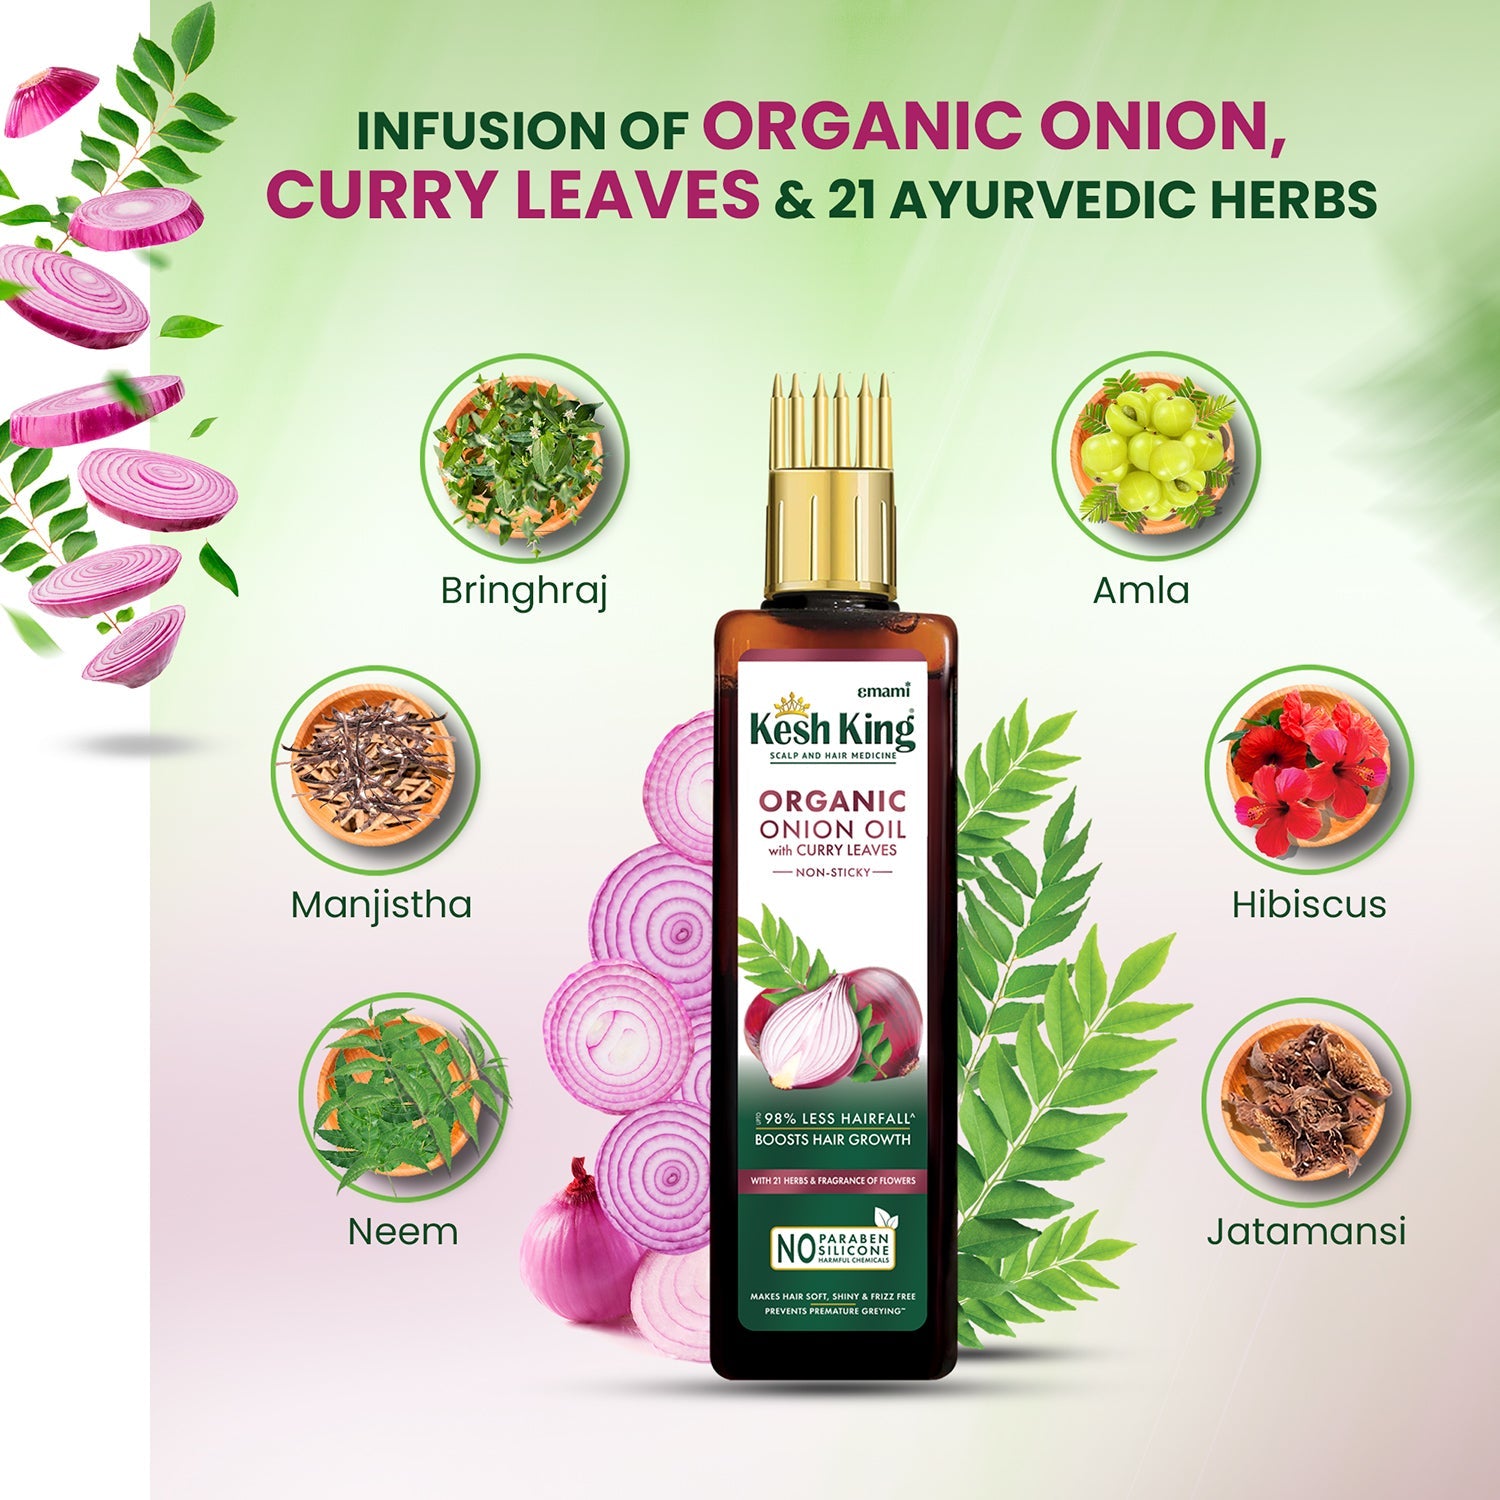 Kesh King Organic Onion Oil With Curry Leaves Reduces Hair Fall Upto 98% and Boosts Hair Growth | Non-Sticky Formula | Fragrance of Flowers | Goodness of Onion, Curry Leaves, Amla &amp; Bhringraj -100ml